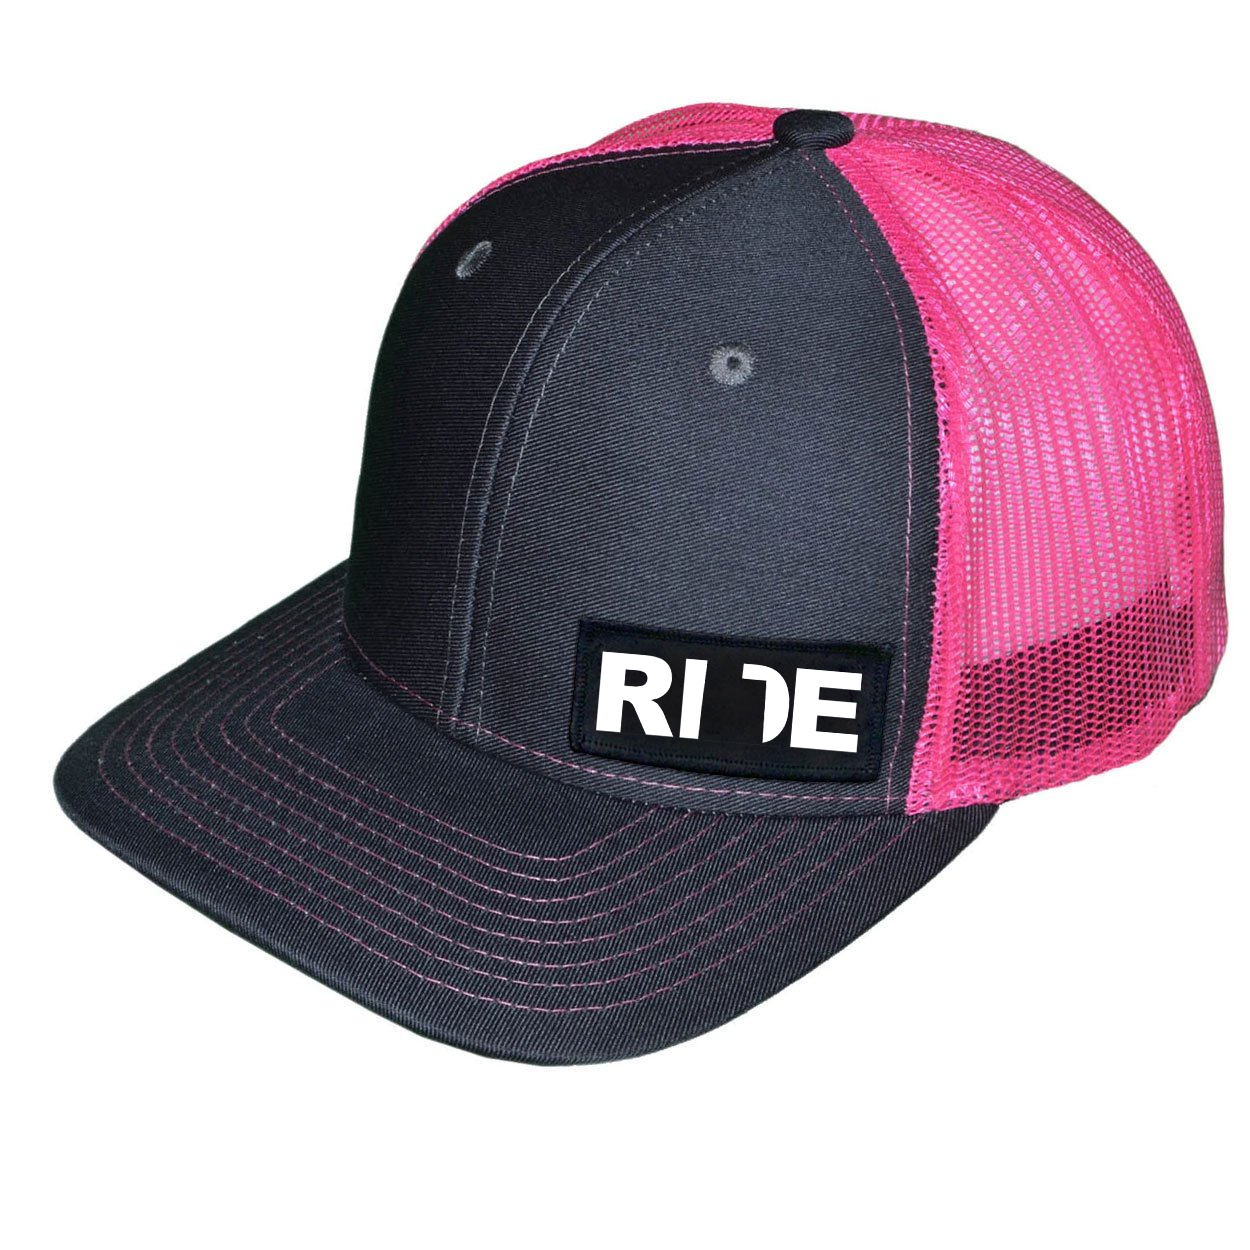 Ride Utah Night Out Woven Patch Snapback Trucker Hat Charcoal/Neon Pink (White Logo)